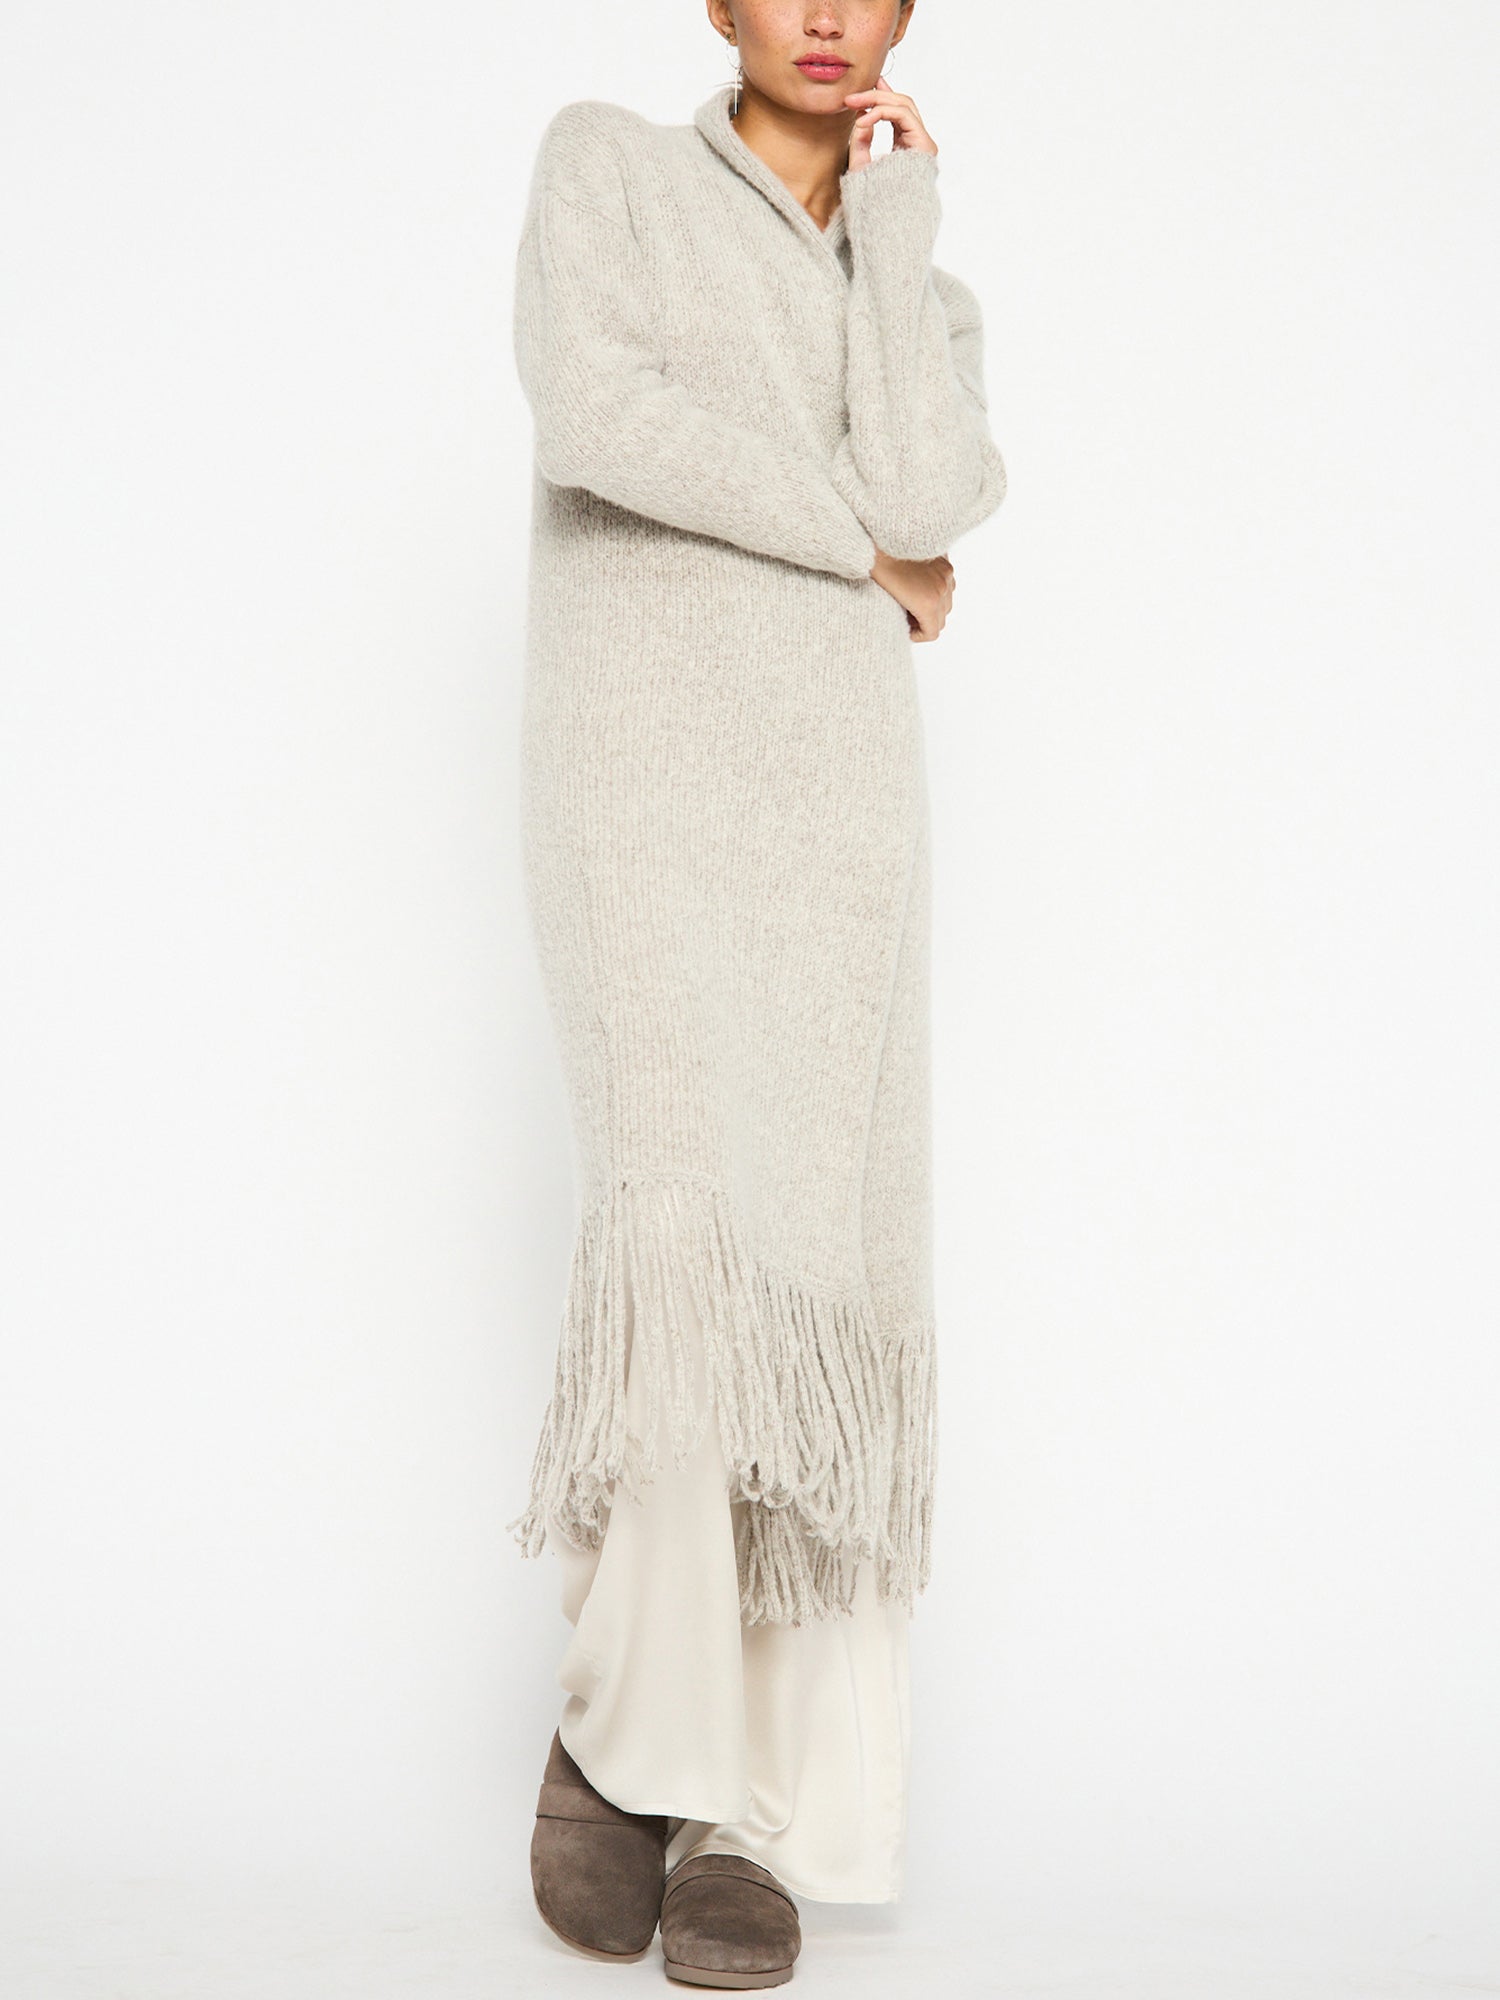 Thela light grey fringe cashmere wool duster cardigan front view 4